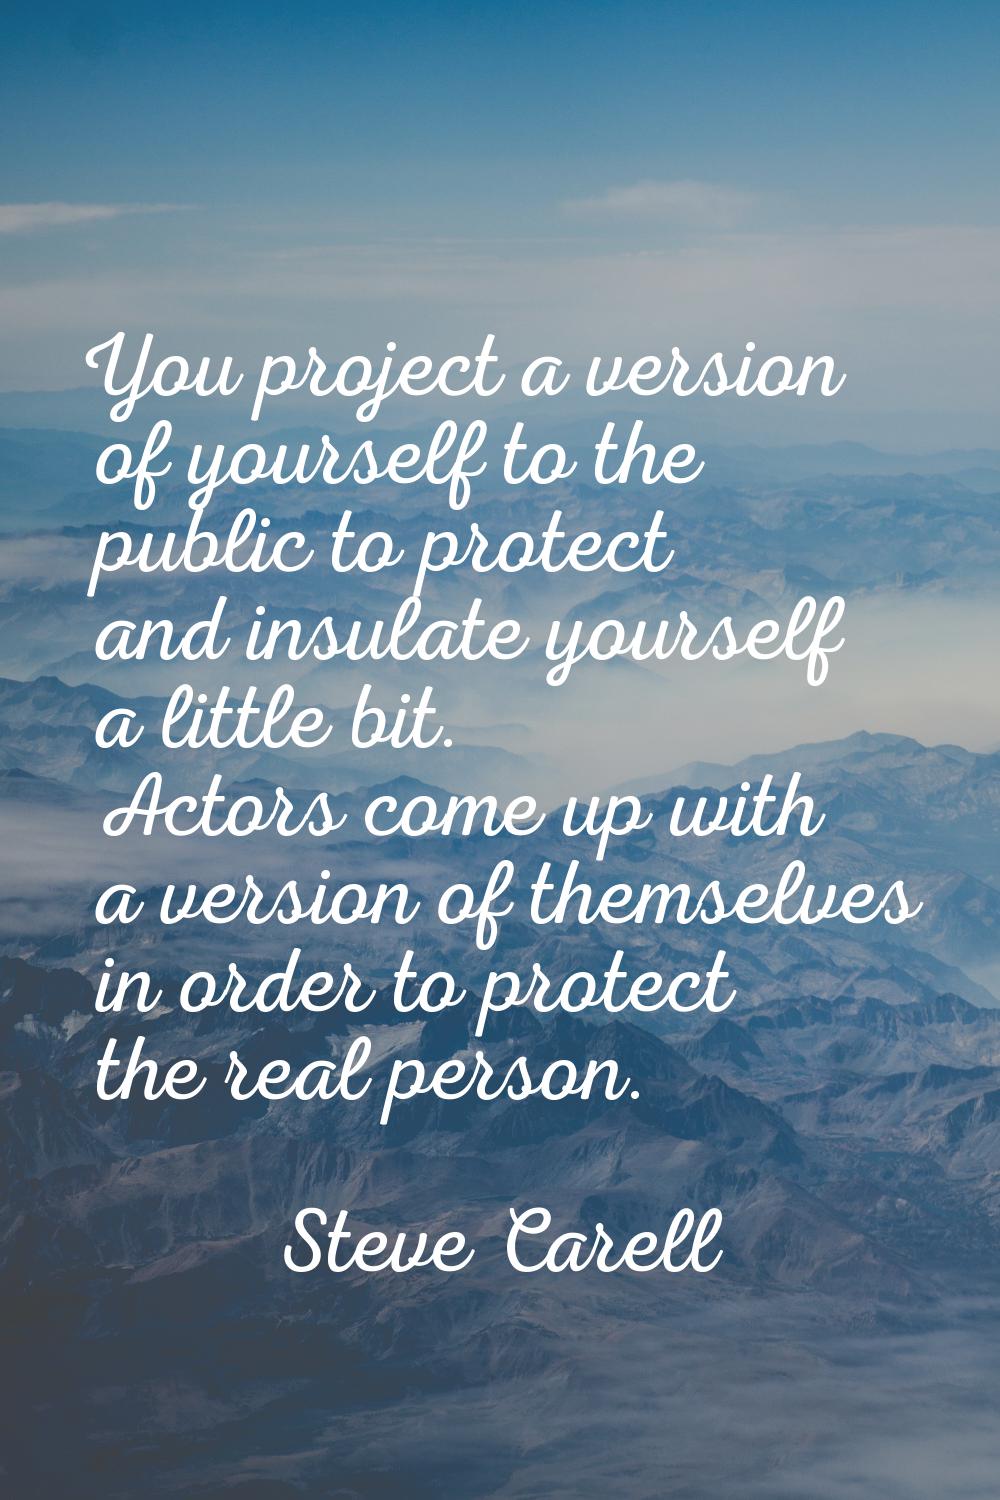 You project a version of yourself to the public to protect and insulate yourself a little bit. Acto